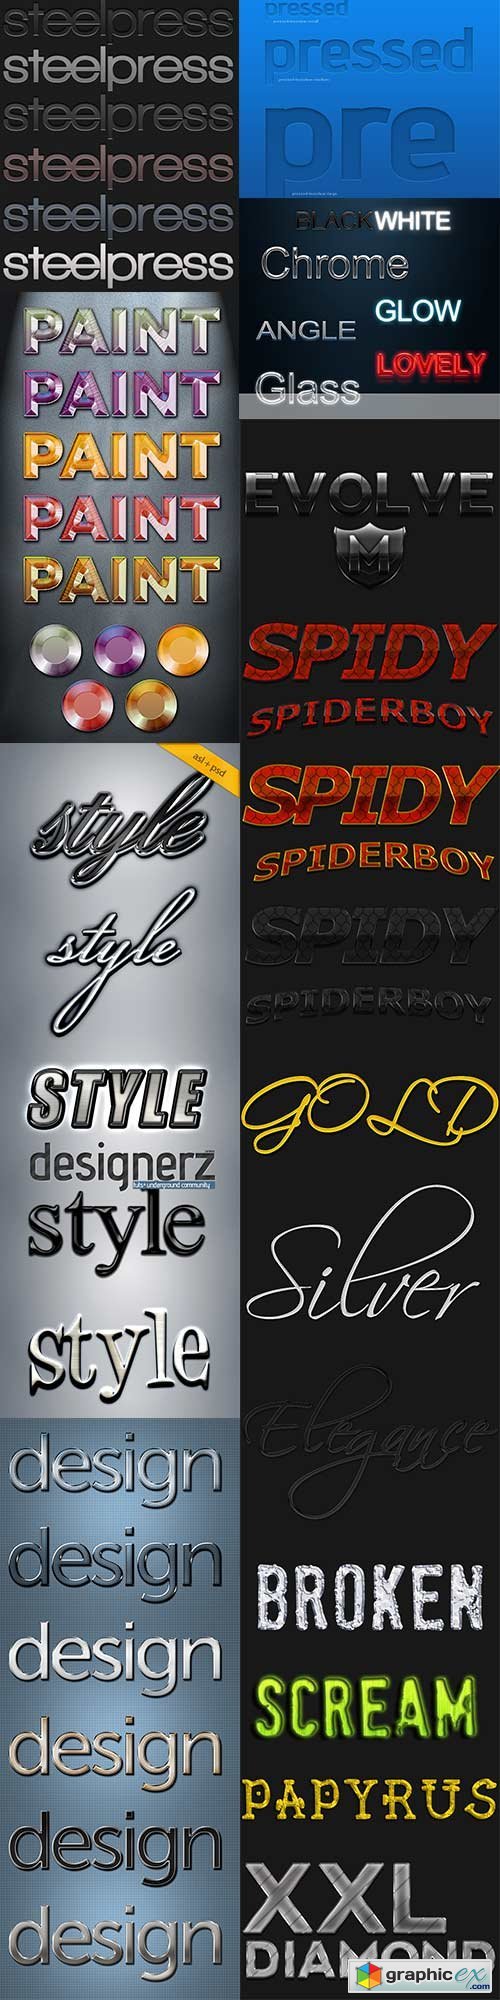 Different styles for photoshop